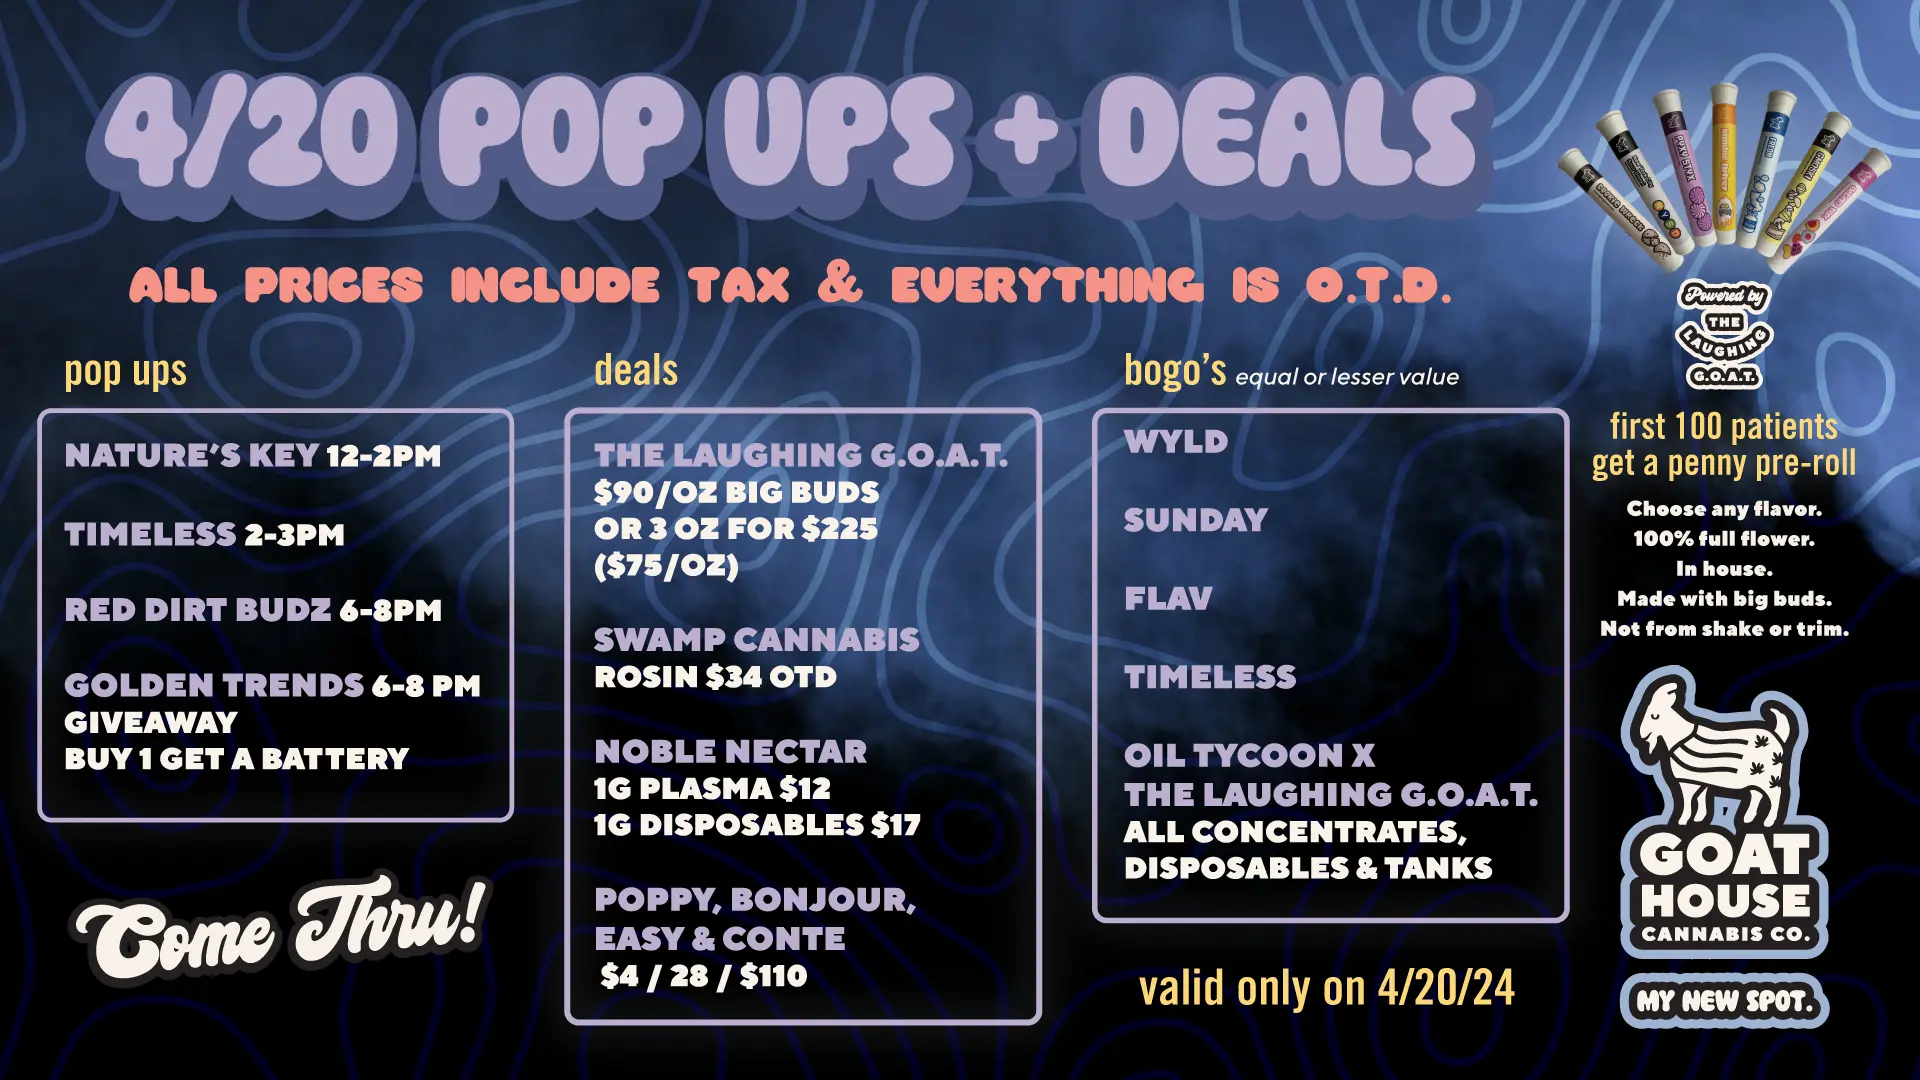 Goat House day of 4/20 deals with pop-ups OKC Gets Lit! Our Epic 4-20 Best Deals Are Here!